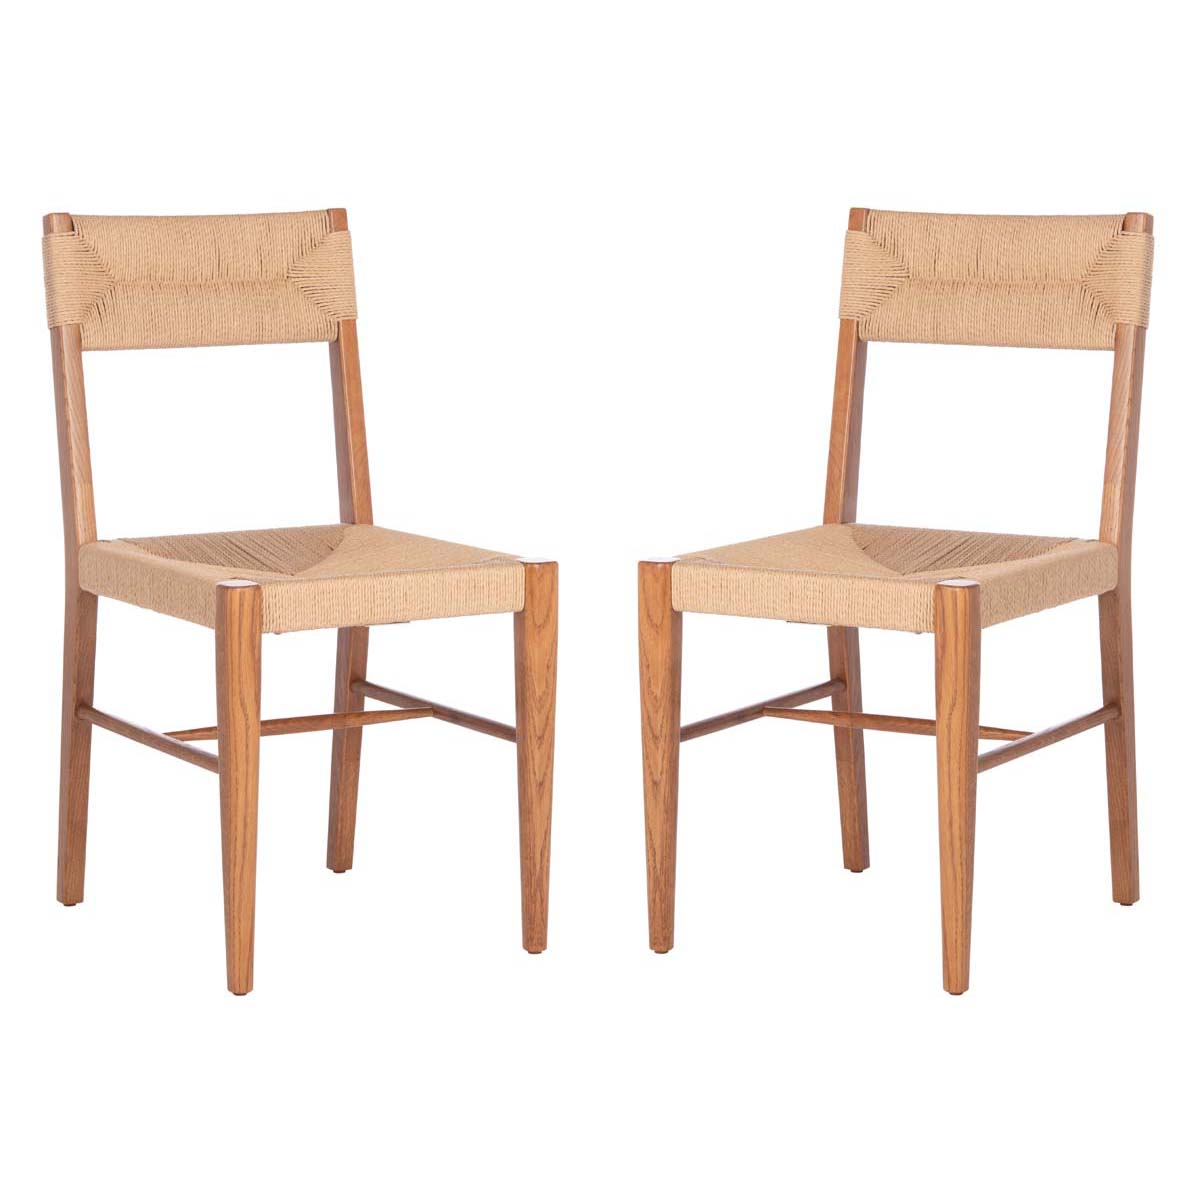 Safavieh Couture Cody Rattan Dining Chair - Natural